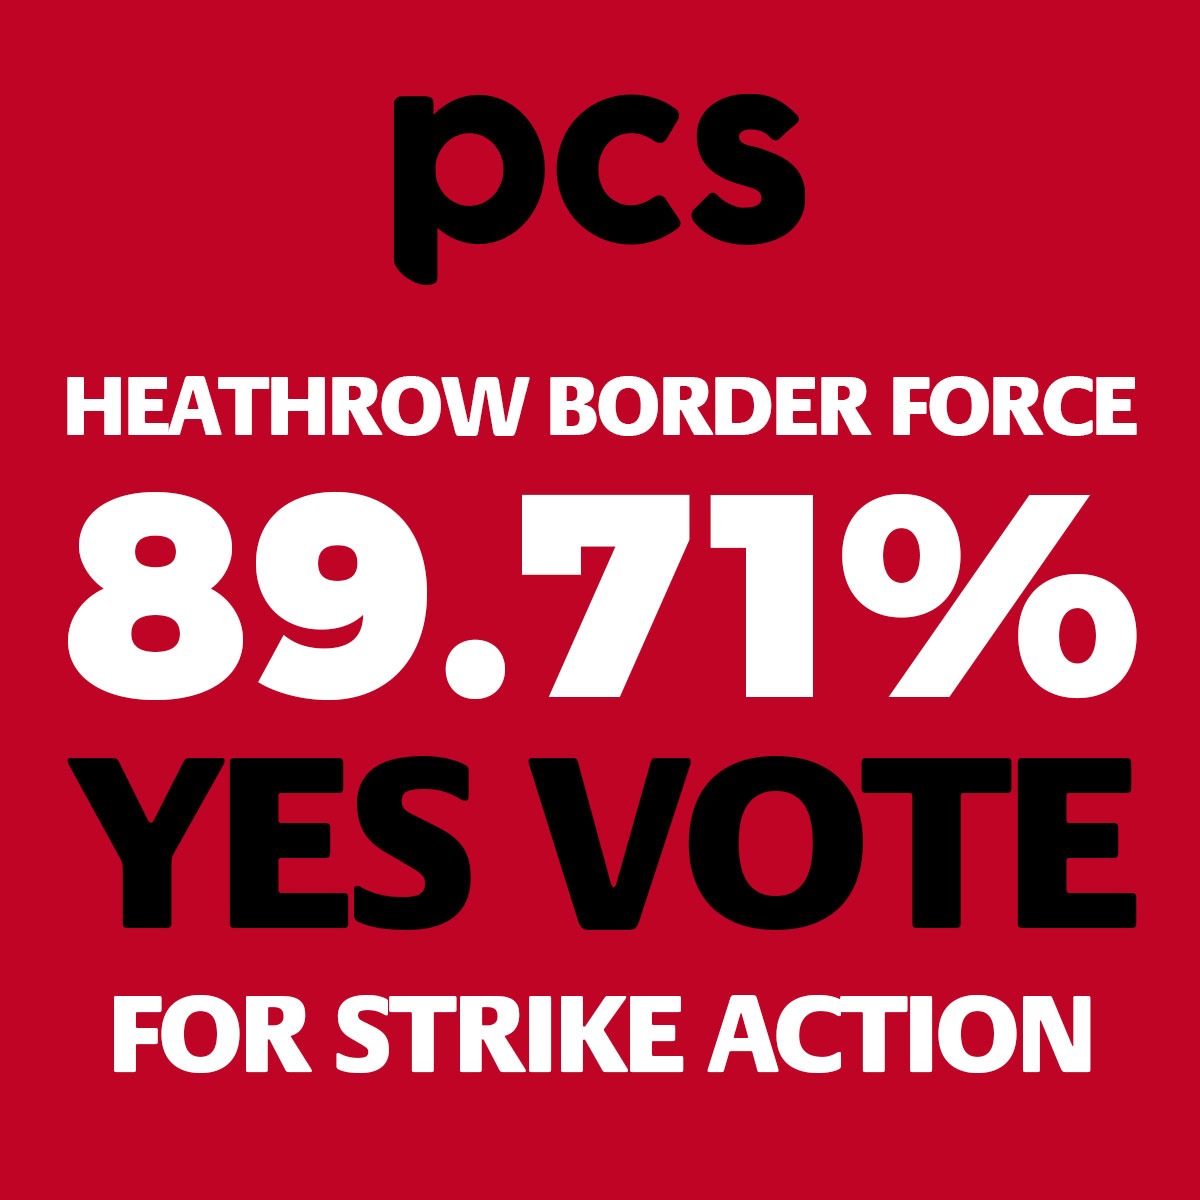 🚨BREAKING PCS members at Heathrow vote for strike action It's a massive ‘YES’ to striking over rosters by Border Force officers. Read more: pcs.org.uk/news-events/ne… #PCSonStrike